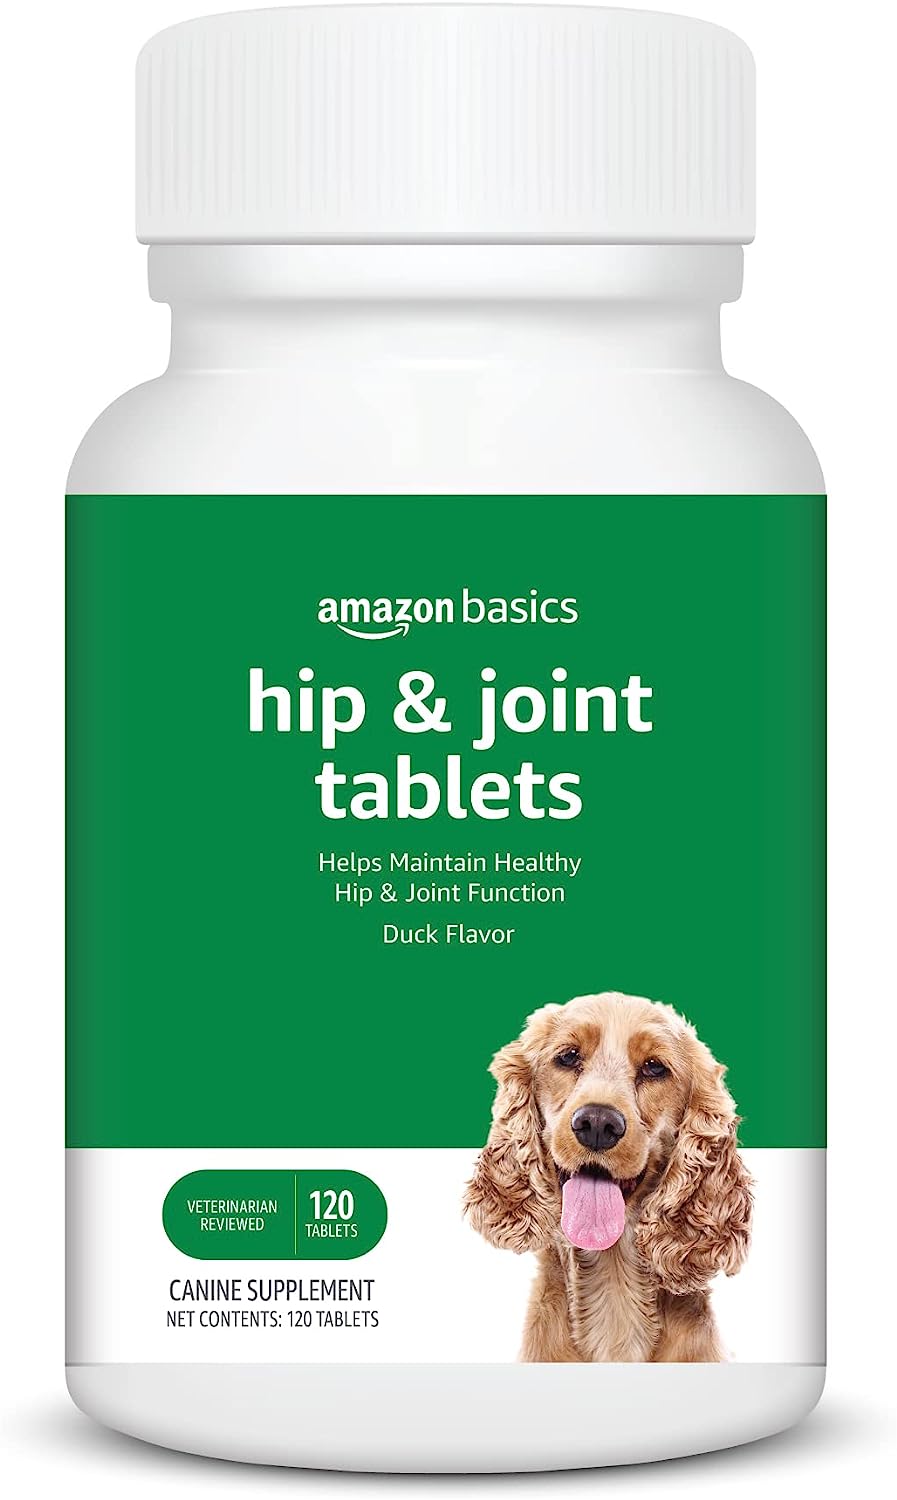 Amazon Basics Dog Hip & Joint Chewable Tablets, Duck Flavored, 120 Count (Previously Solimo)